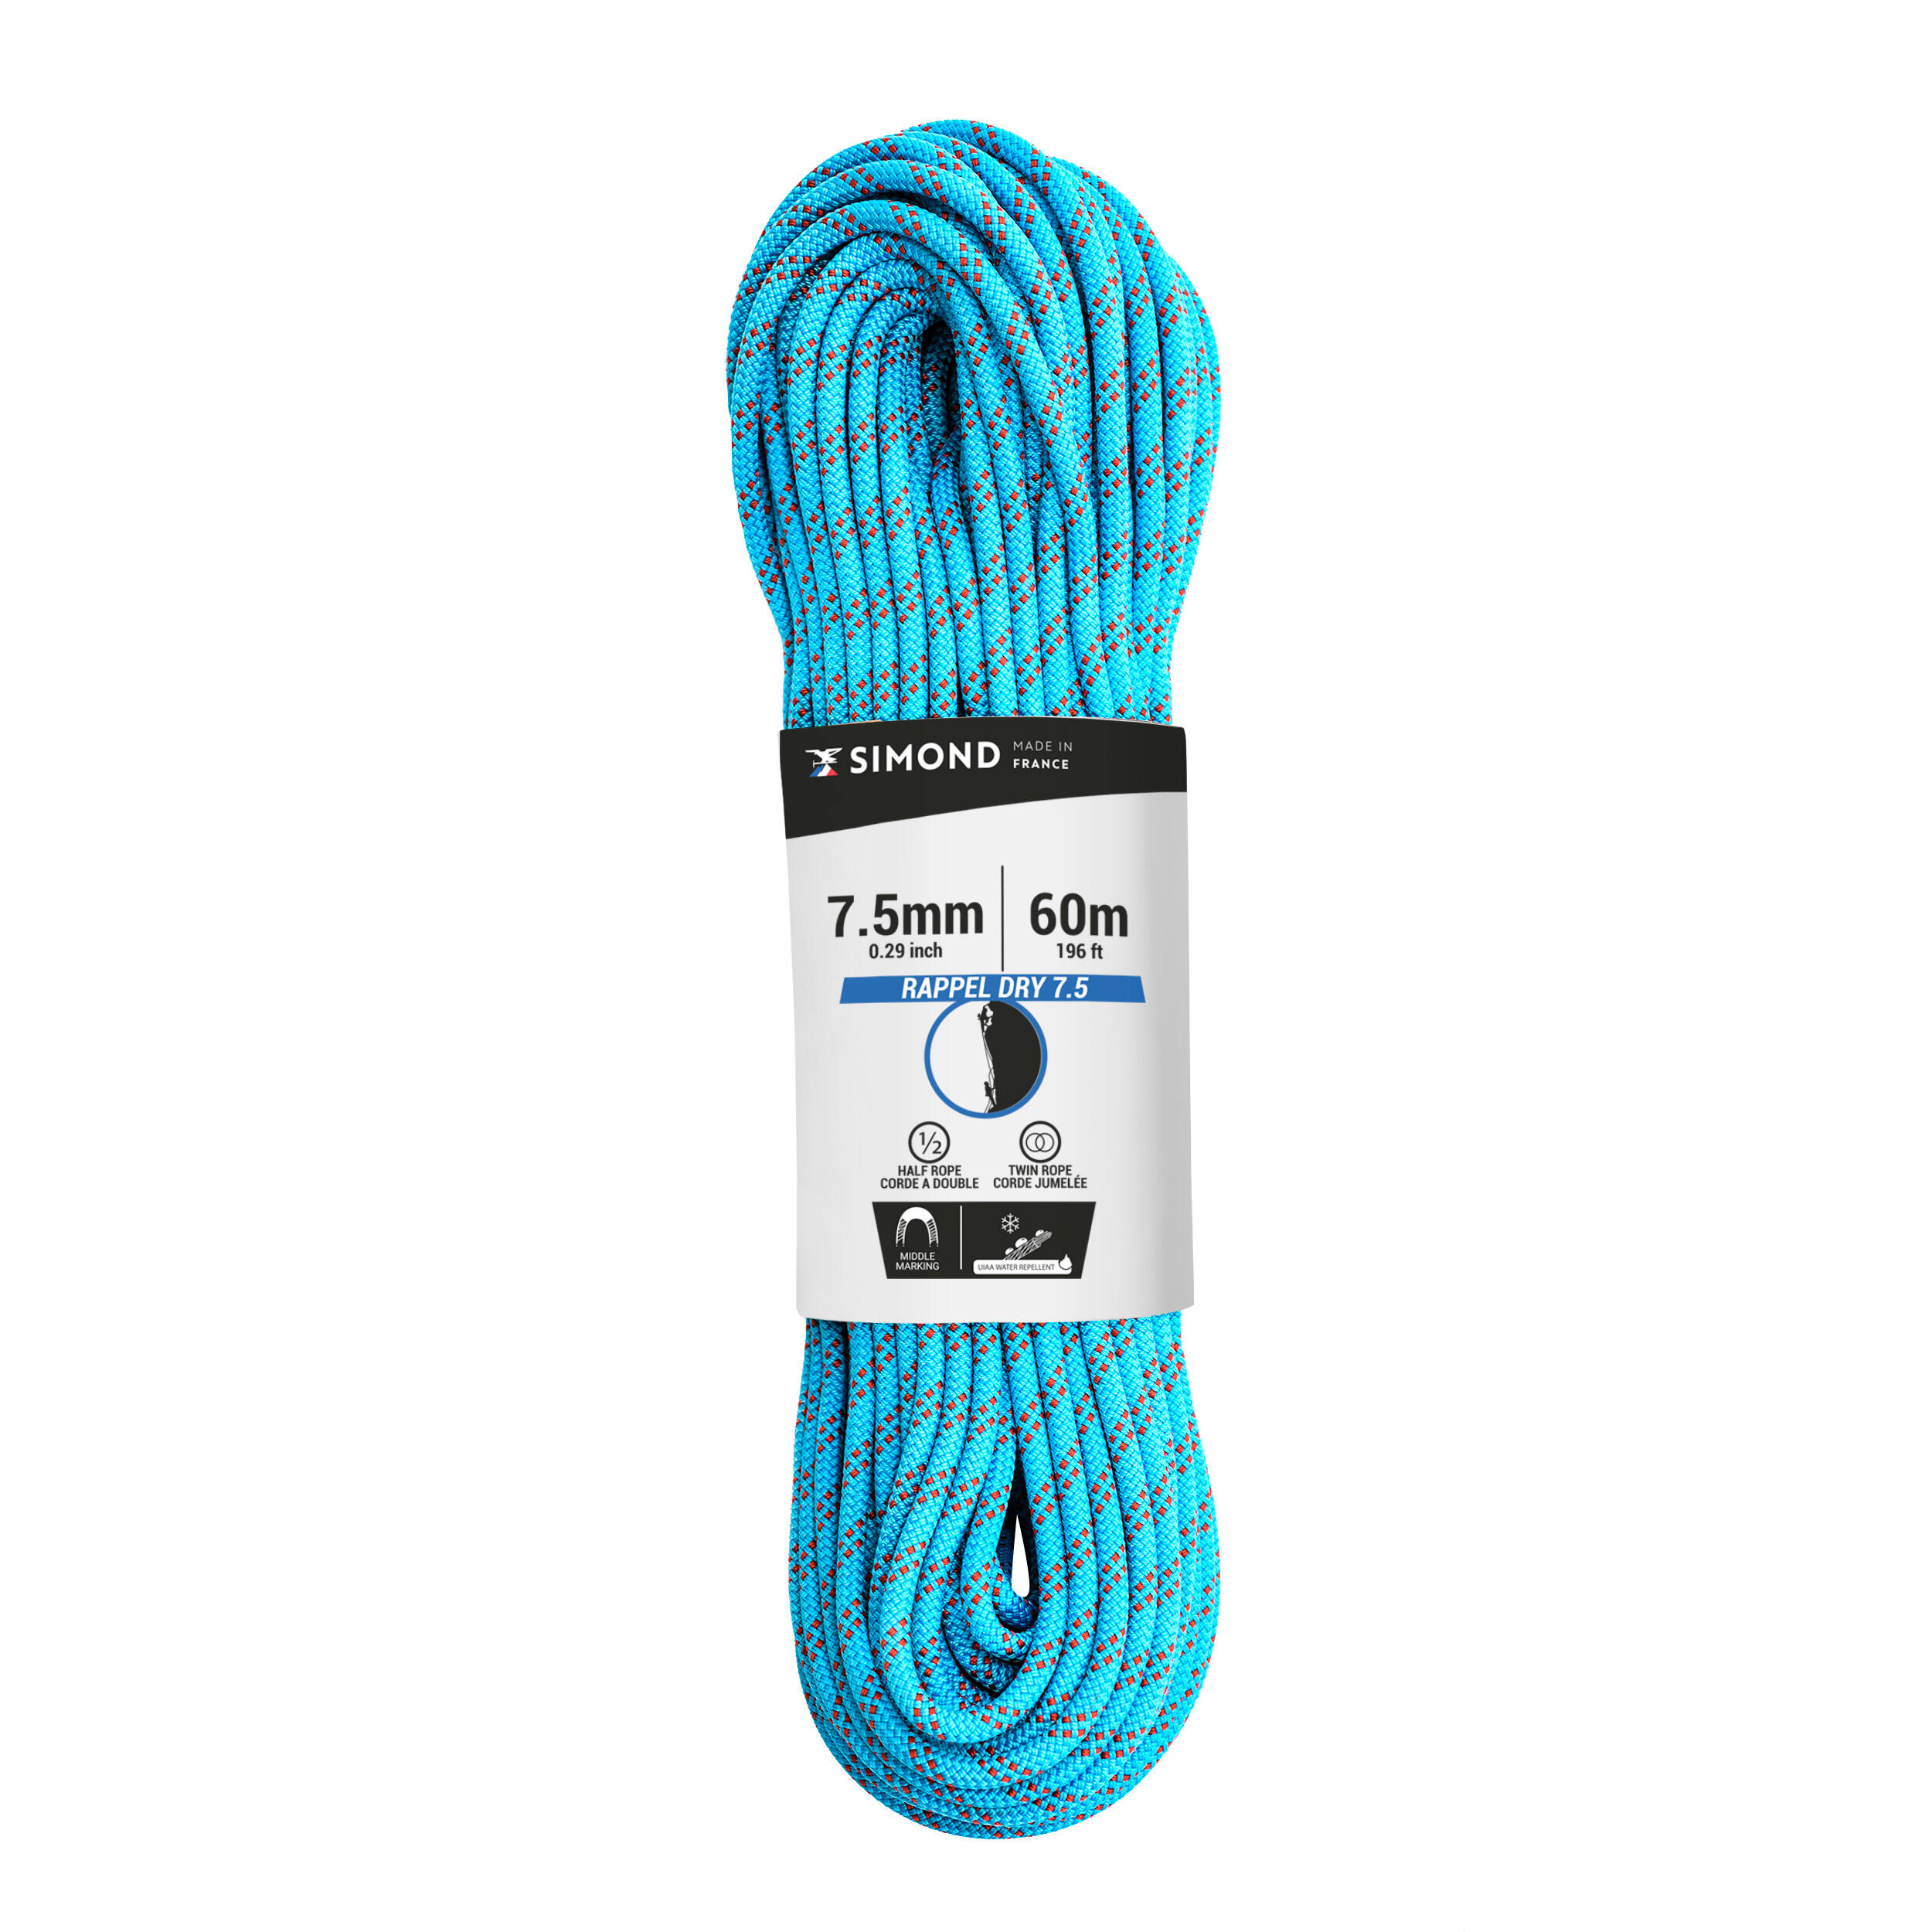 SIMOND Double dry climbing and mountaineering rope 7.5 mm x 60 m - RAPPEL 7.5 Blue